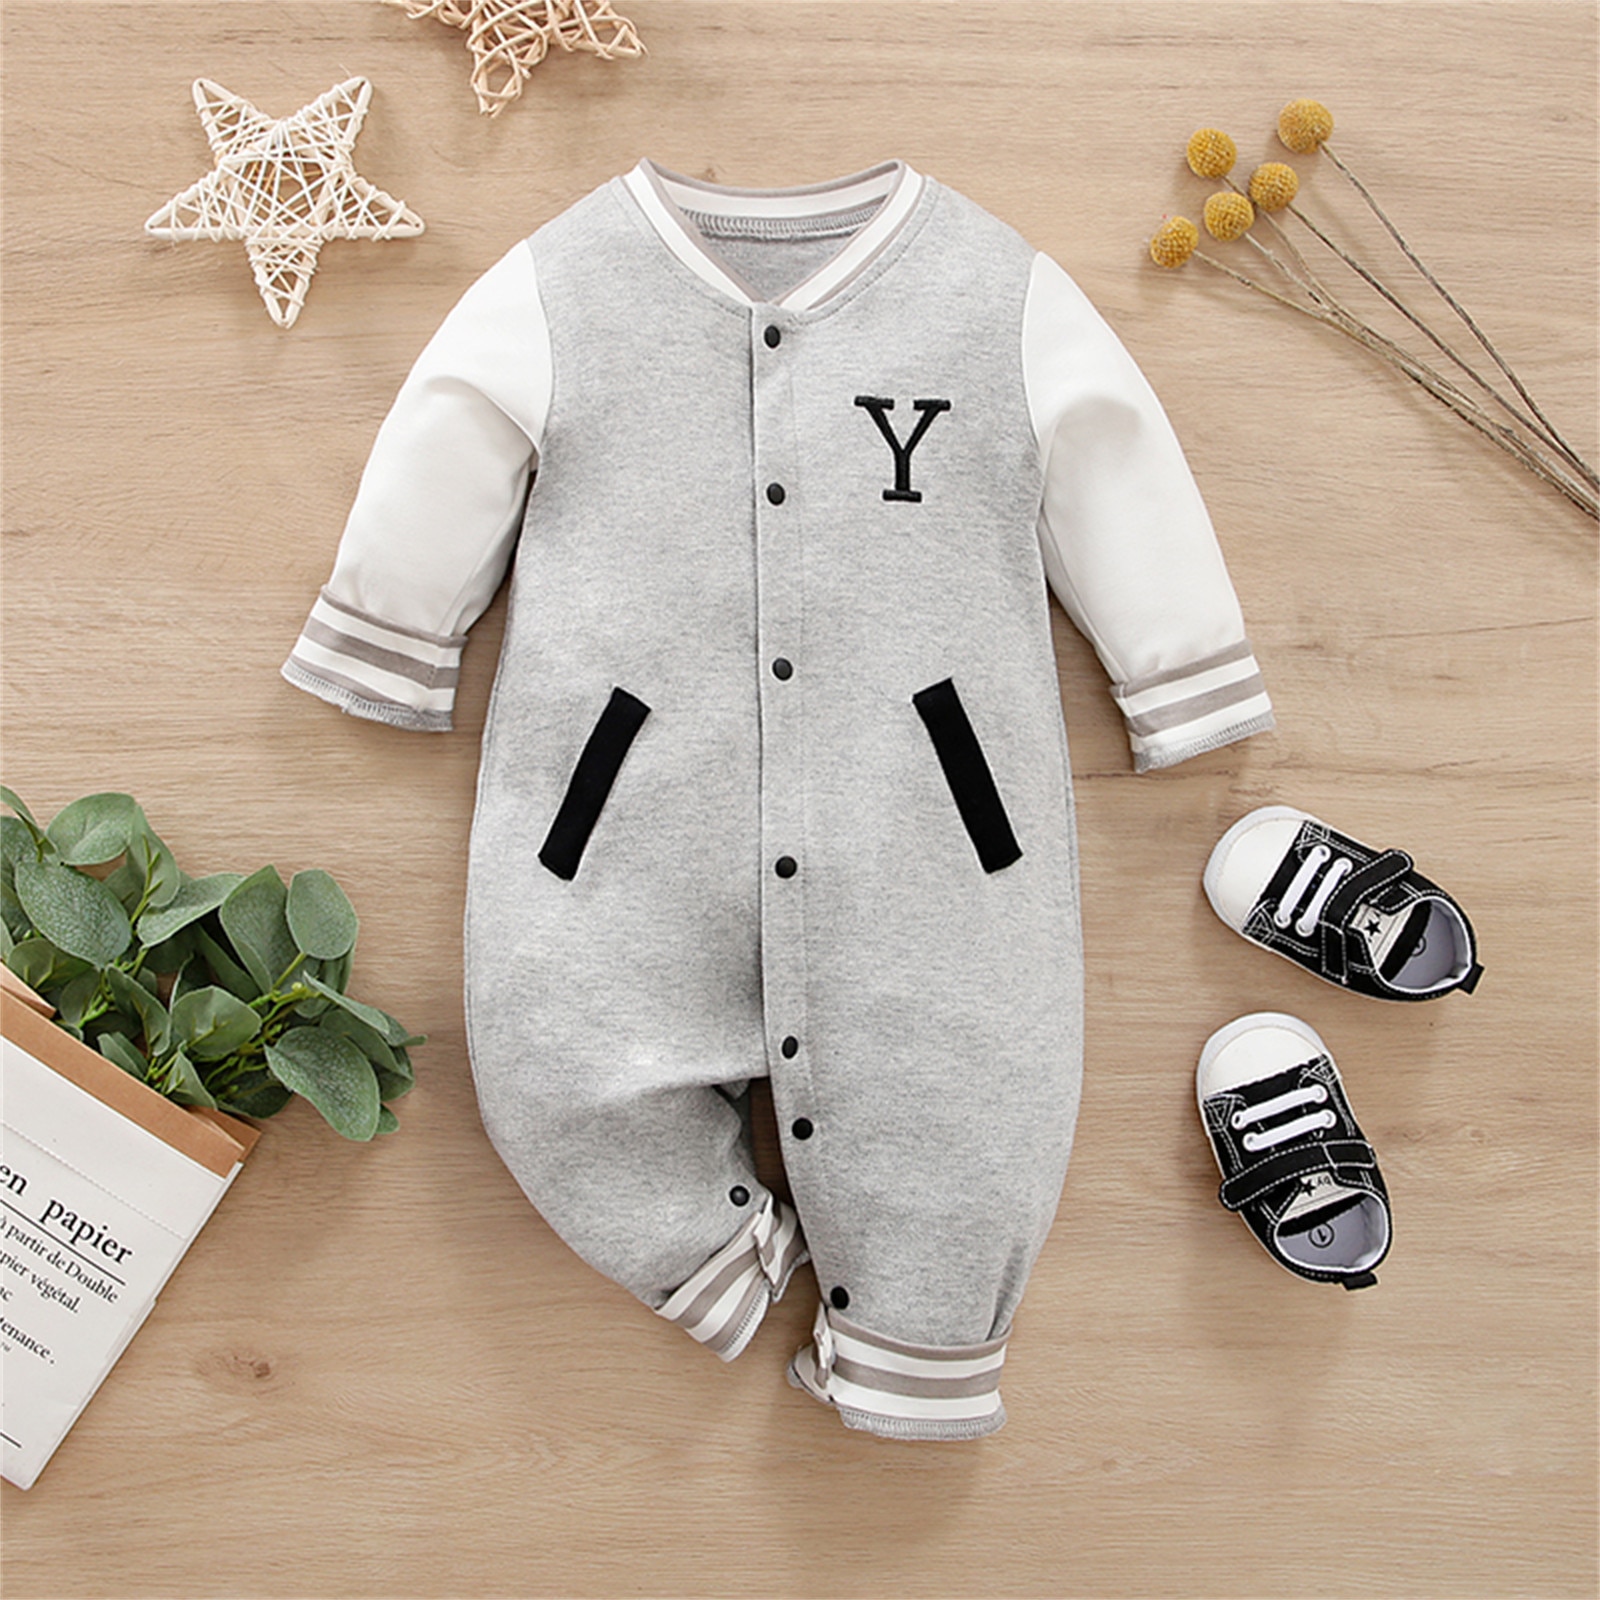 PatPat-100-Cotton-Baby-Boy-Clothes-New-Born-Girl-Overalls-Jumpsuit-Romper-Infant-Newborn-Letter-Embroidered-2